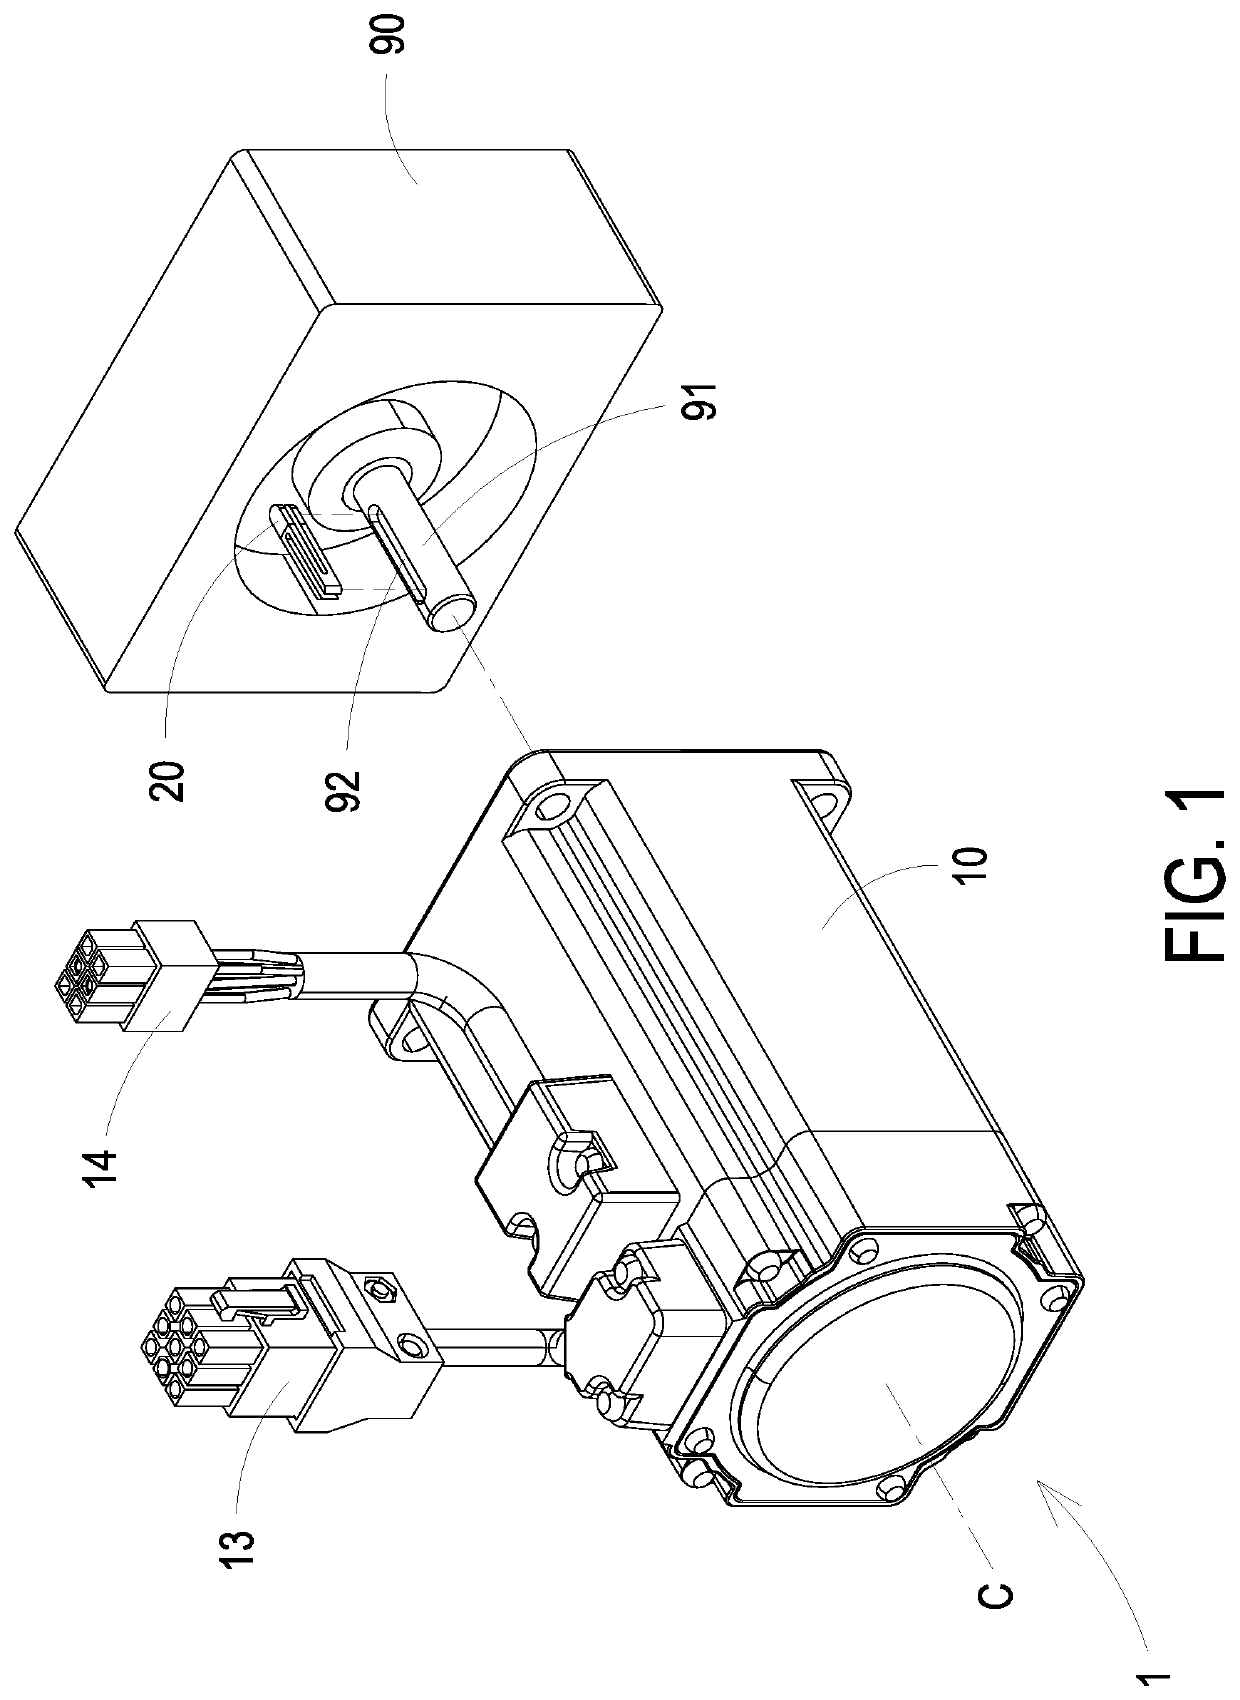 Modular motor assembly structure